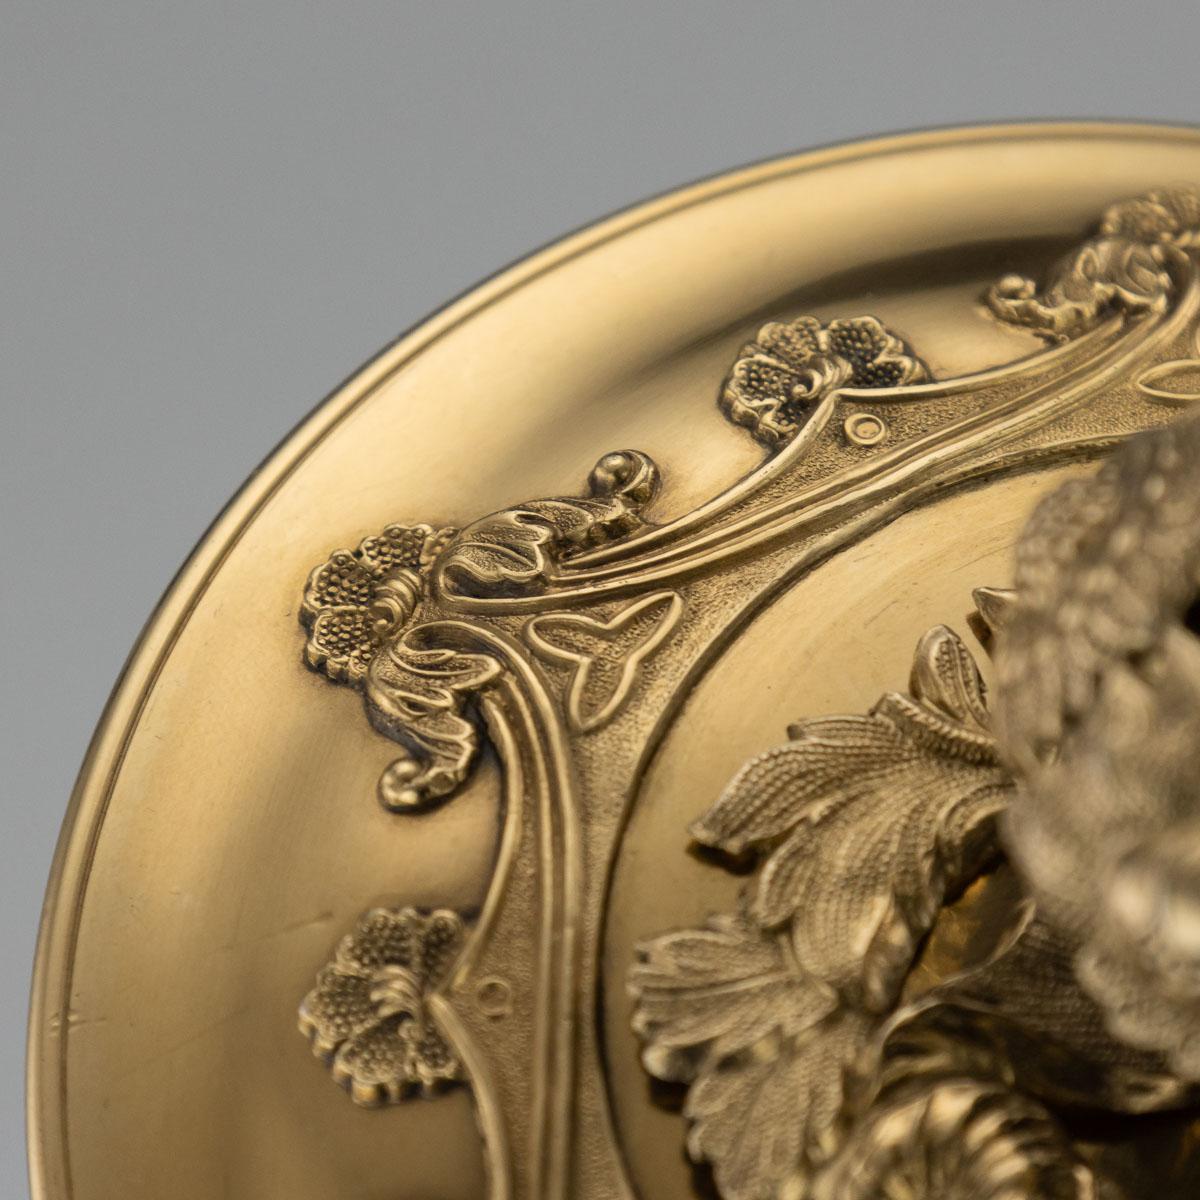 19th Century Russian Solid Silver-Gilt Cup and Cover, St-Petersburg, circa 1842 5